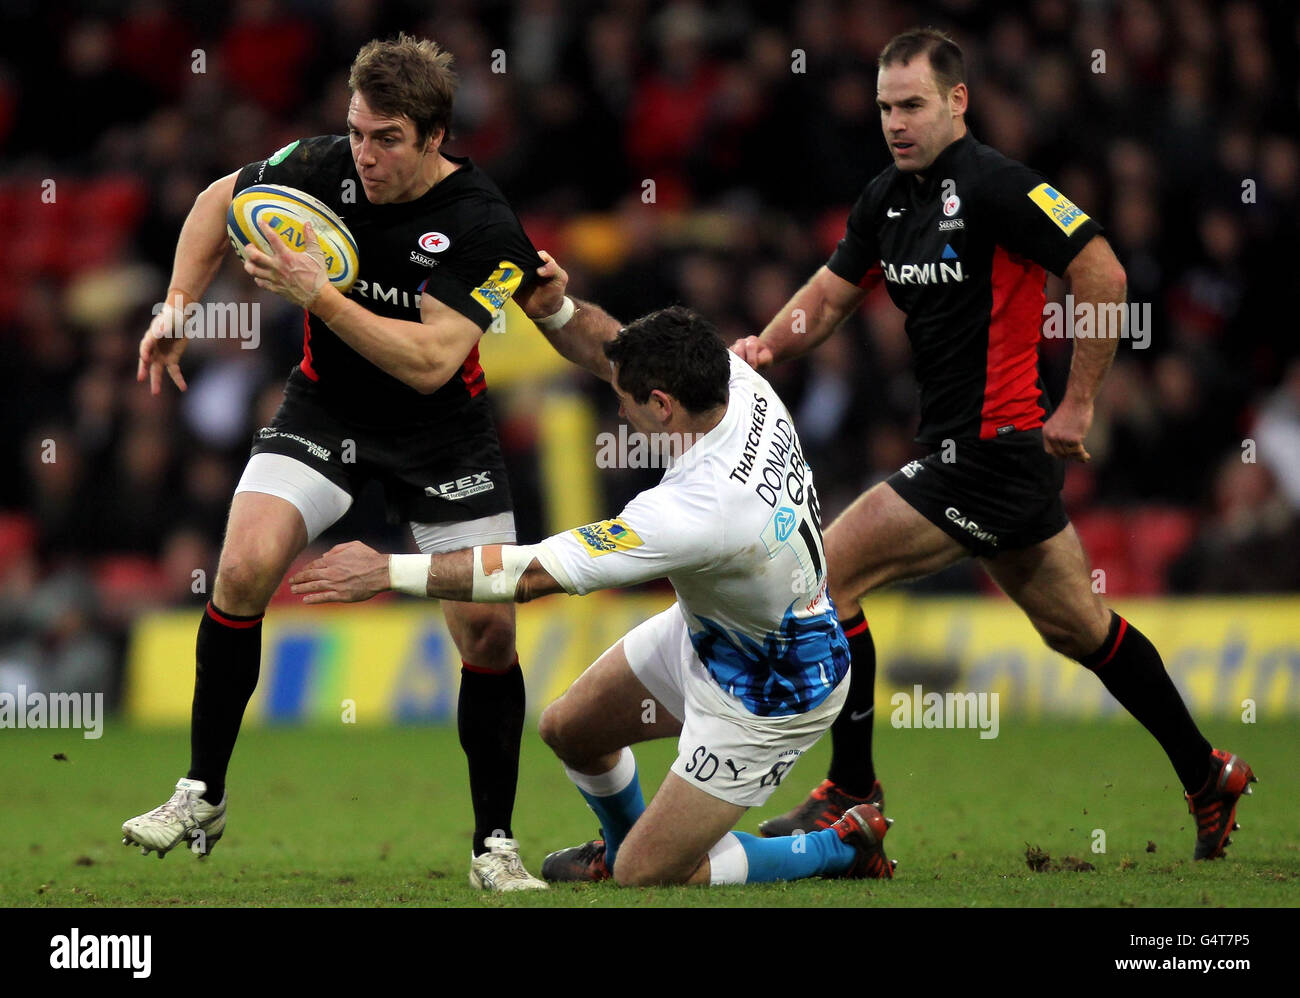 Saracens Chris Wyles is tackled by Bath's Stephen Donald during the Aviva Premiership match at Vicarage Road, Watford. Stock Photo